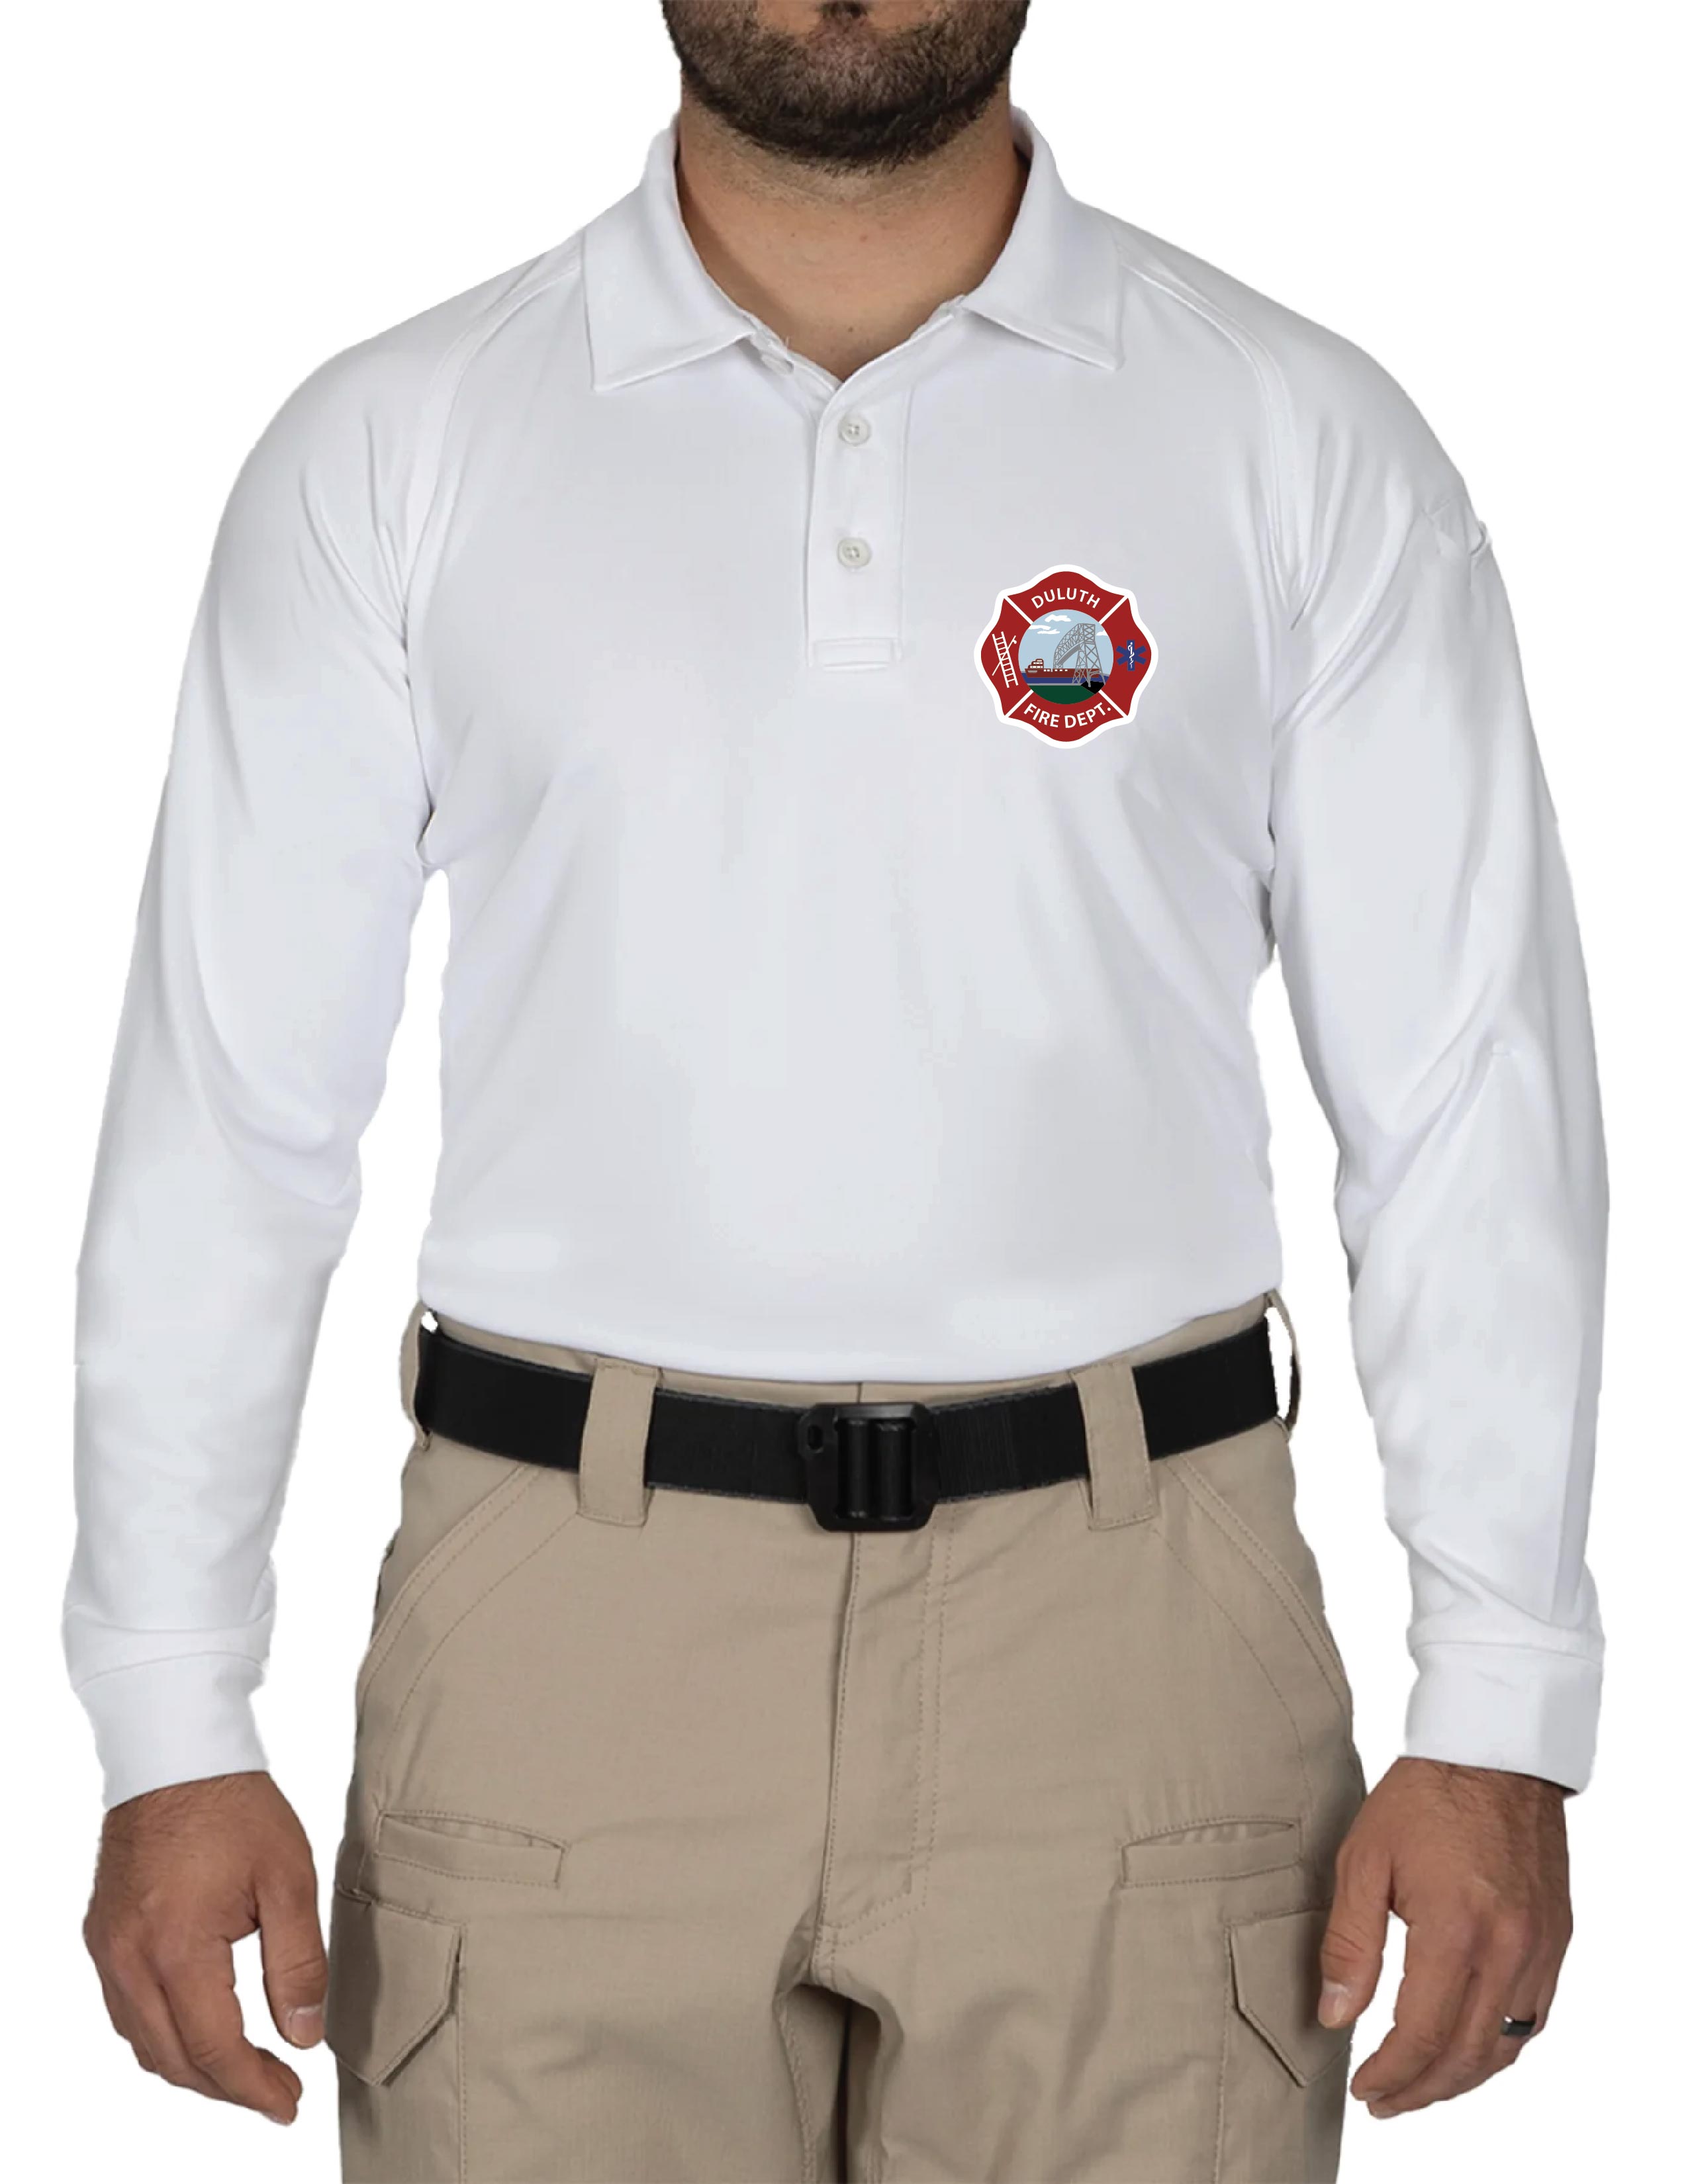 H) STYLE# 111503 MENS FIRST TACTICAL PERFORMANCE LONG SLEEVE POLO